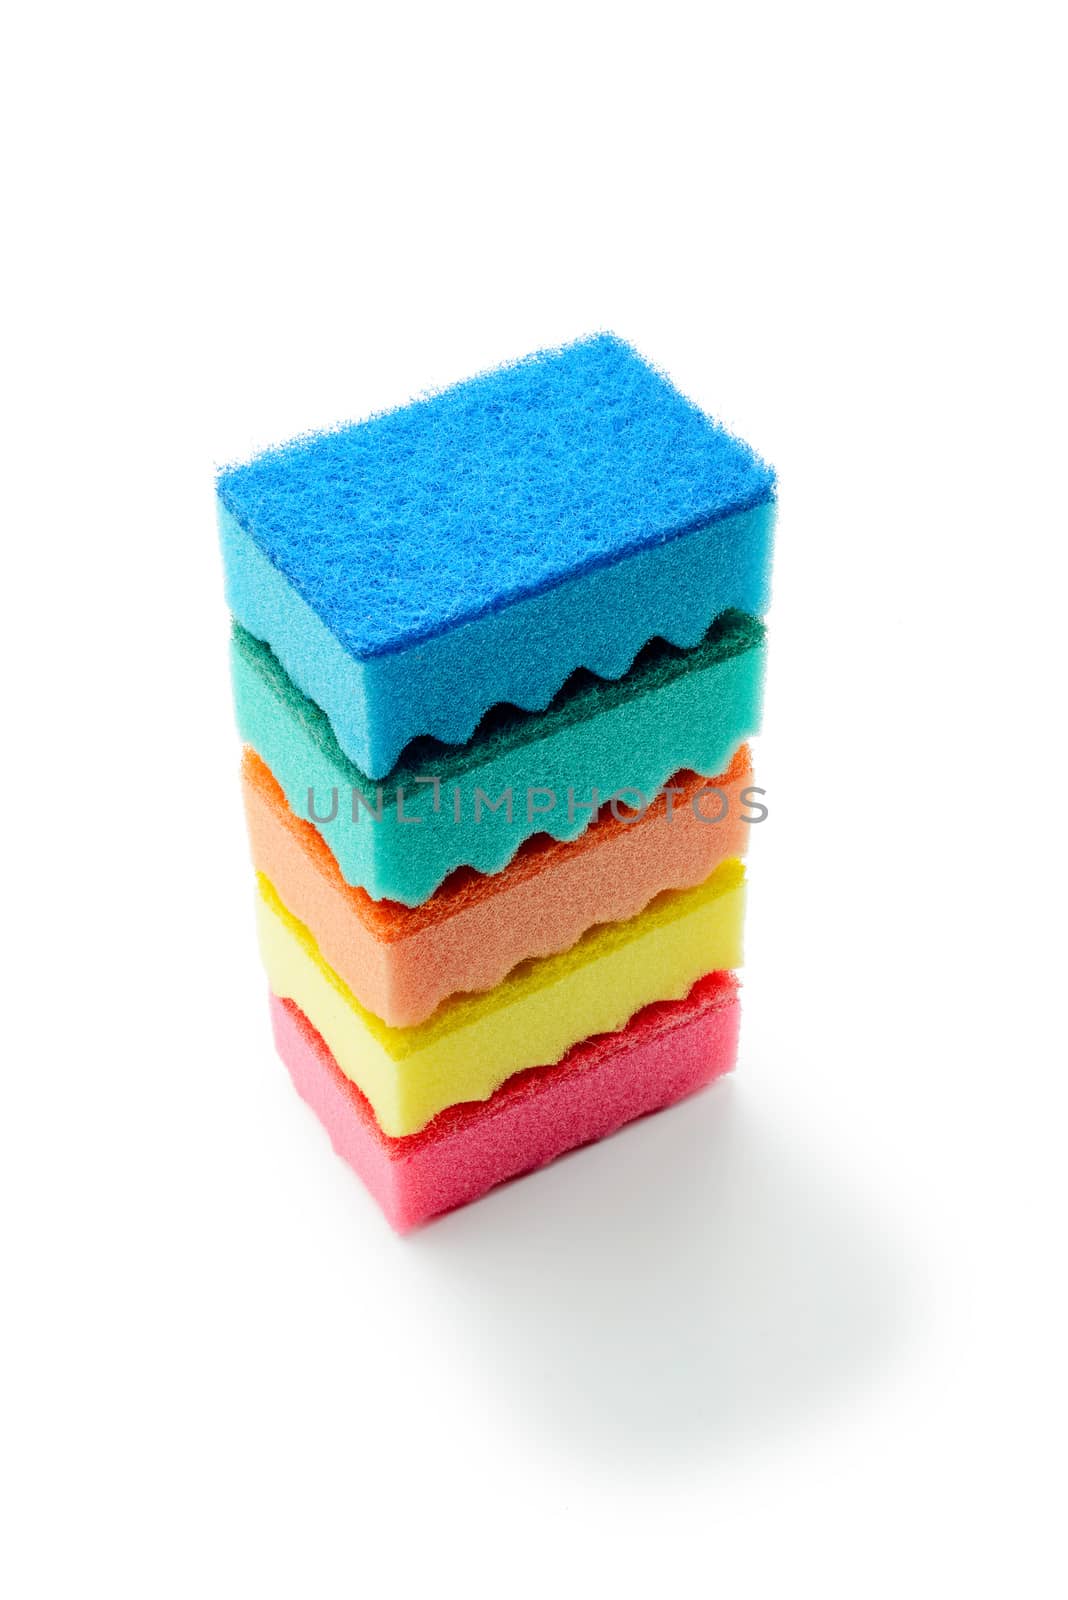 Stack of Multicolored Sponges by MaxalTamor